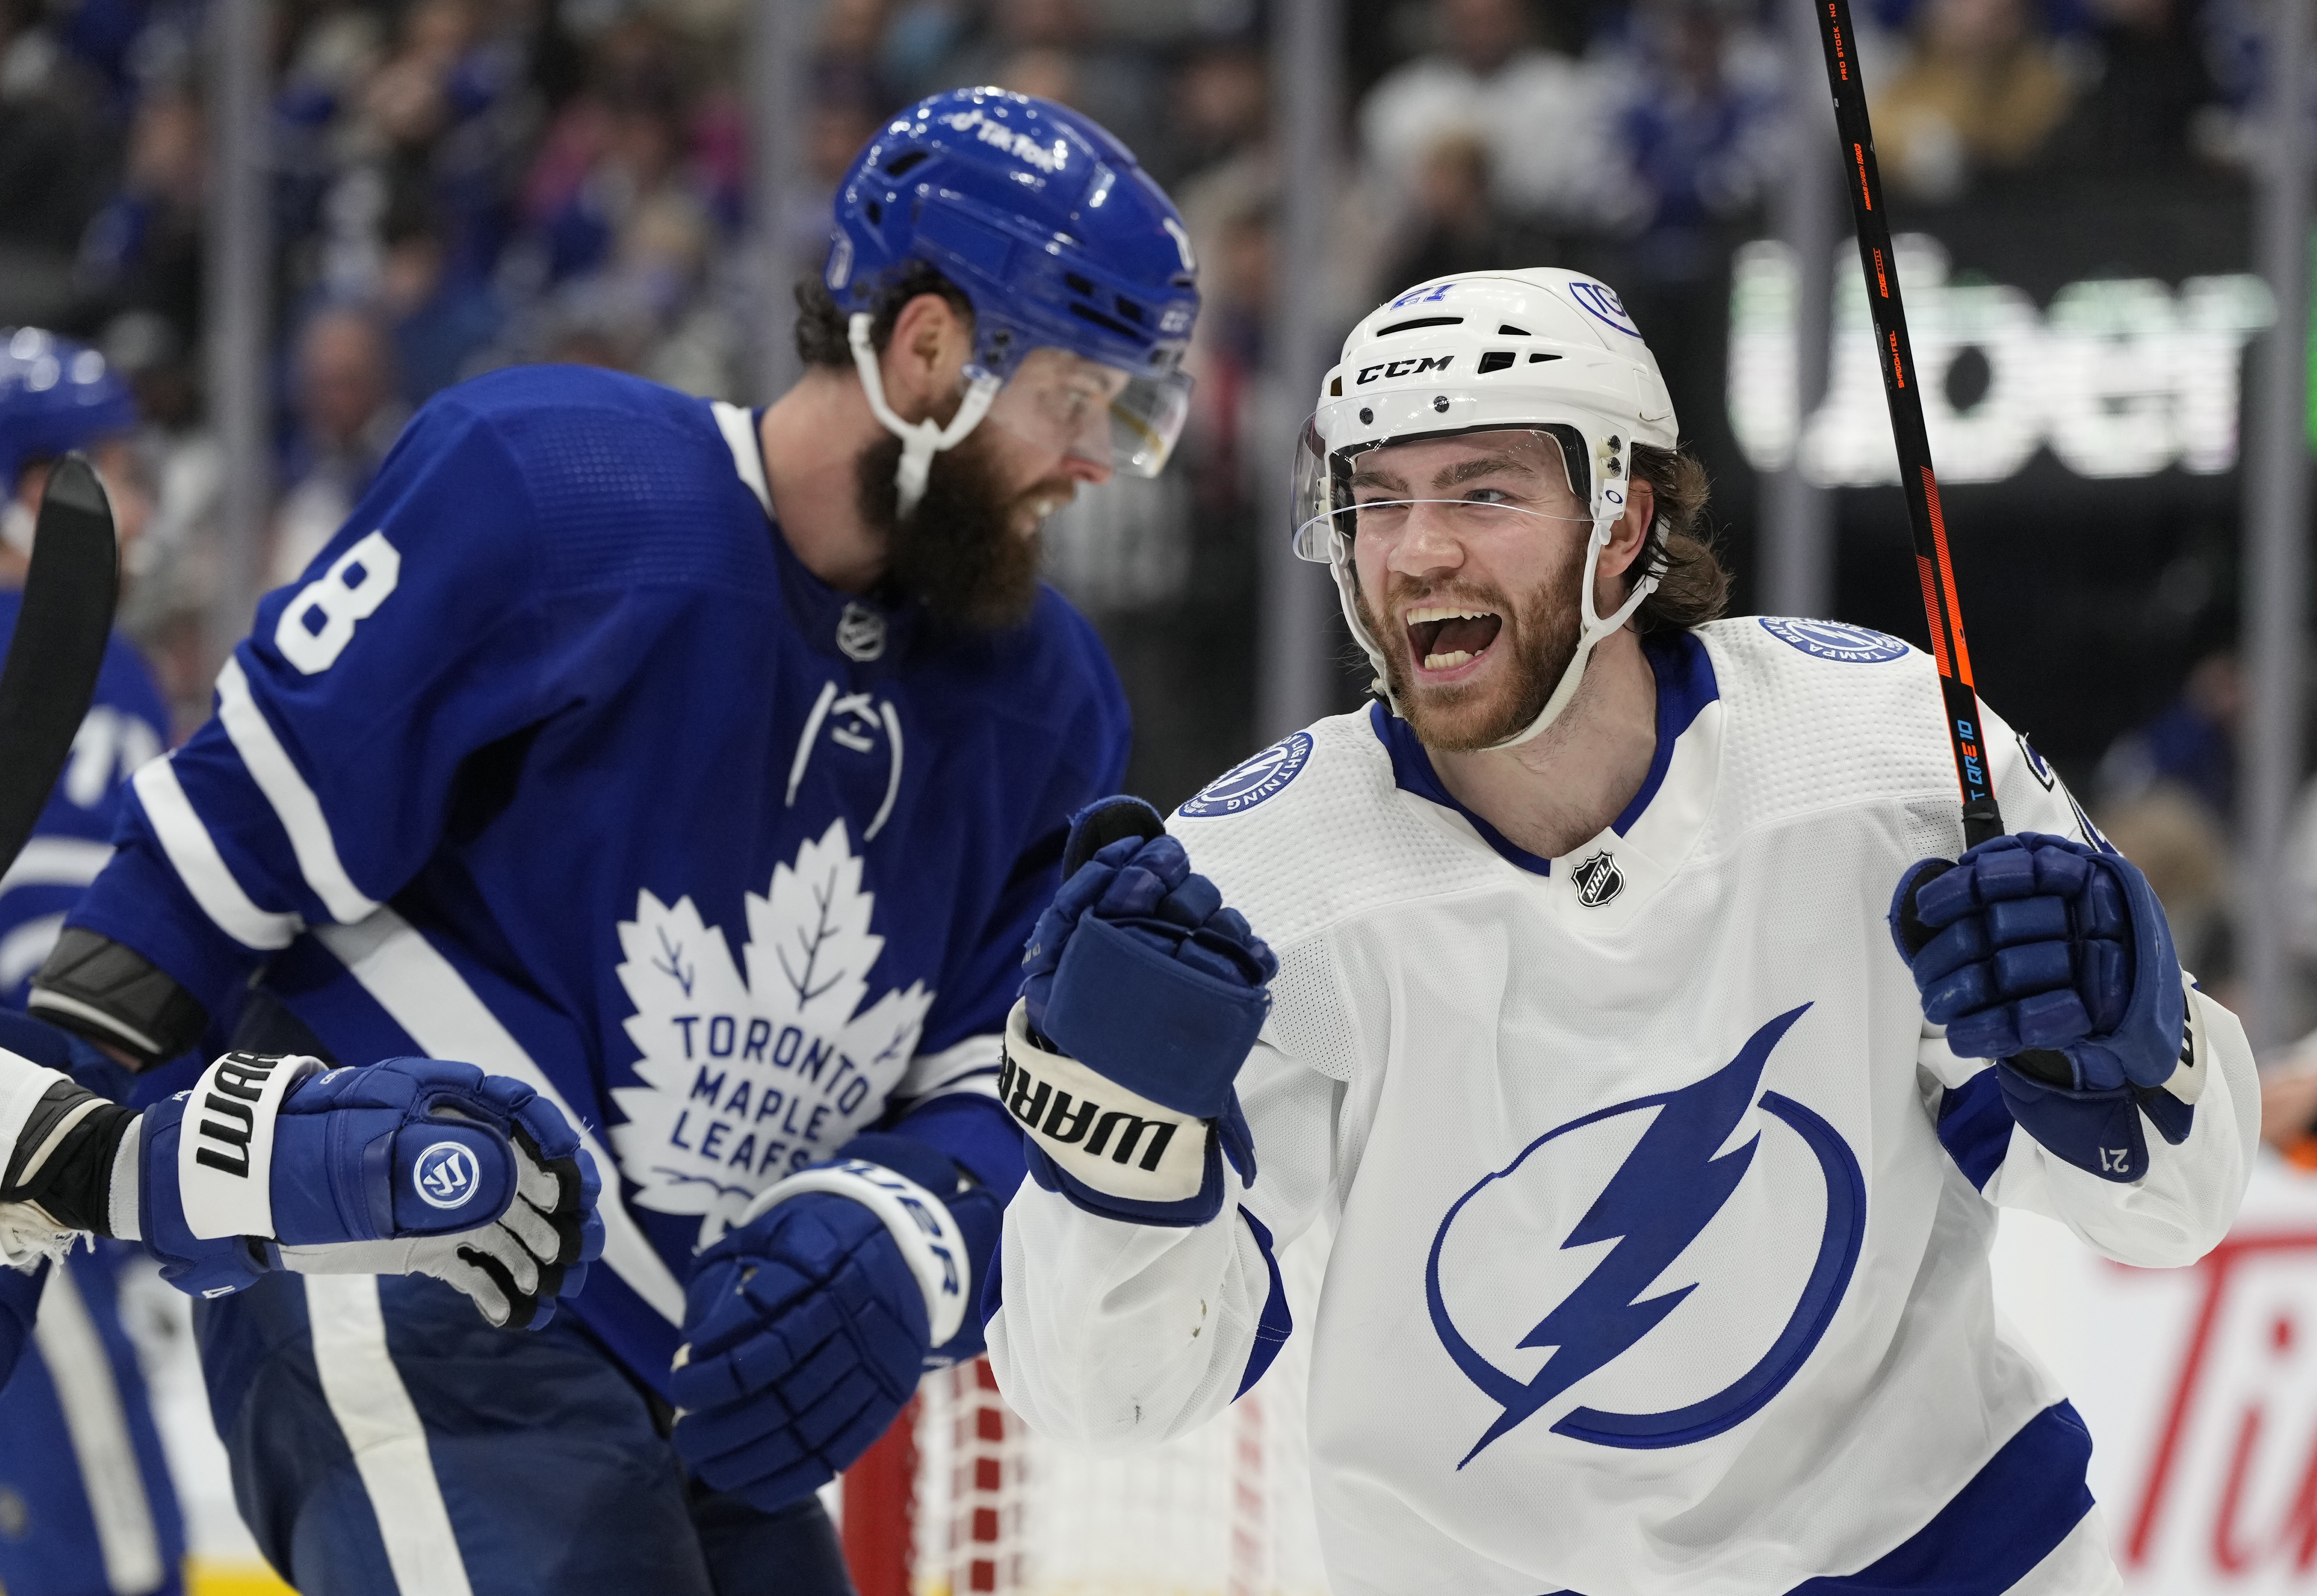 Toronto Maple Leafs vs. Tampa Bay Lightning Game 3 FREE LIVE STREAM  (5/6/22): Watch NHL Stanley Cup Playoffs Round 1 online | Time, TV, channel  